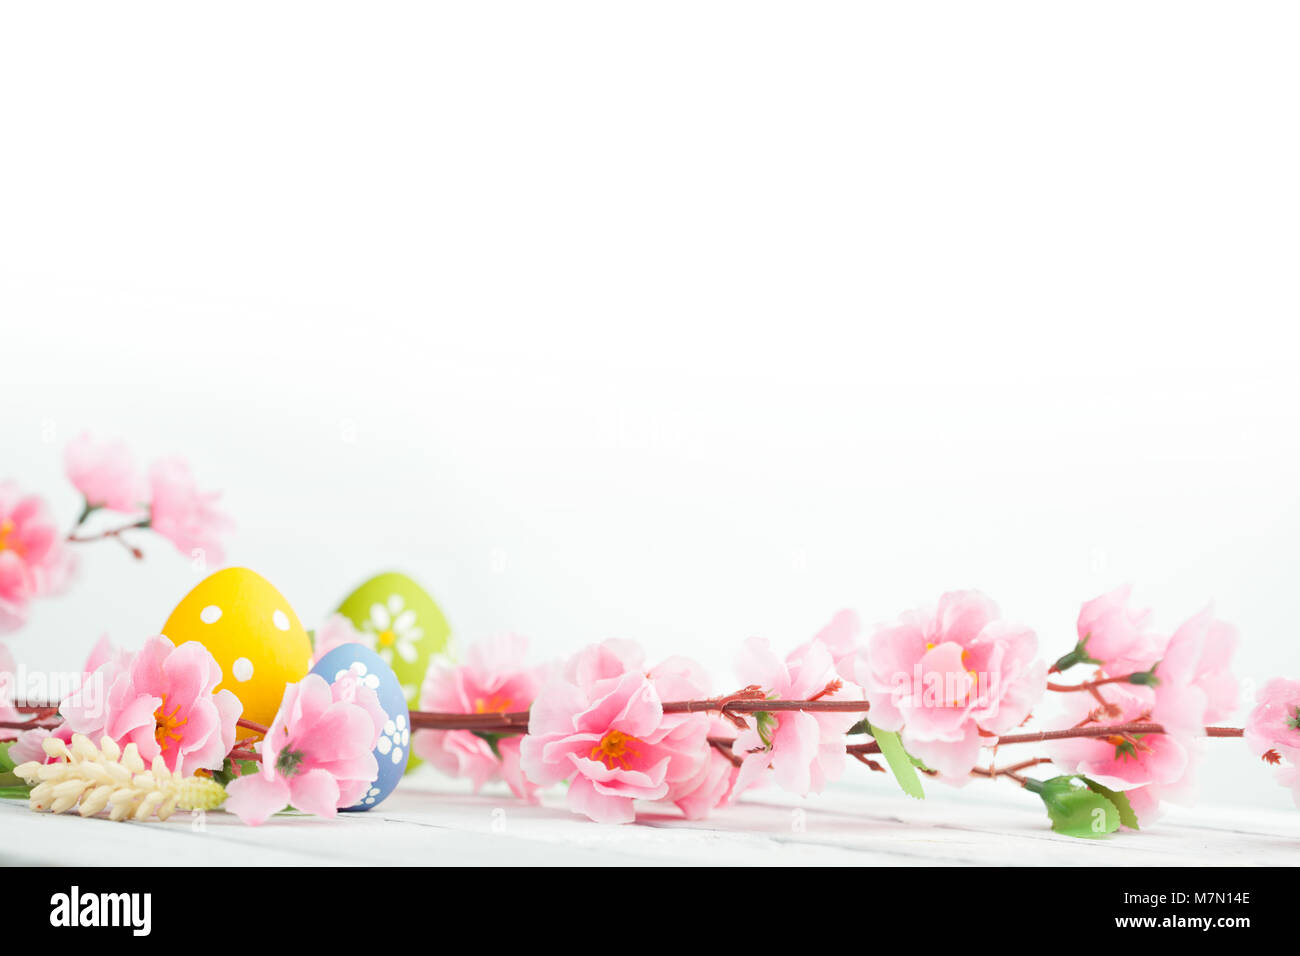 Easter eggs on white wooden table background Stock Photo